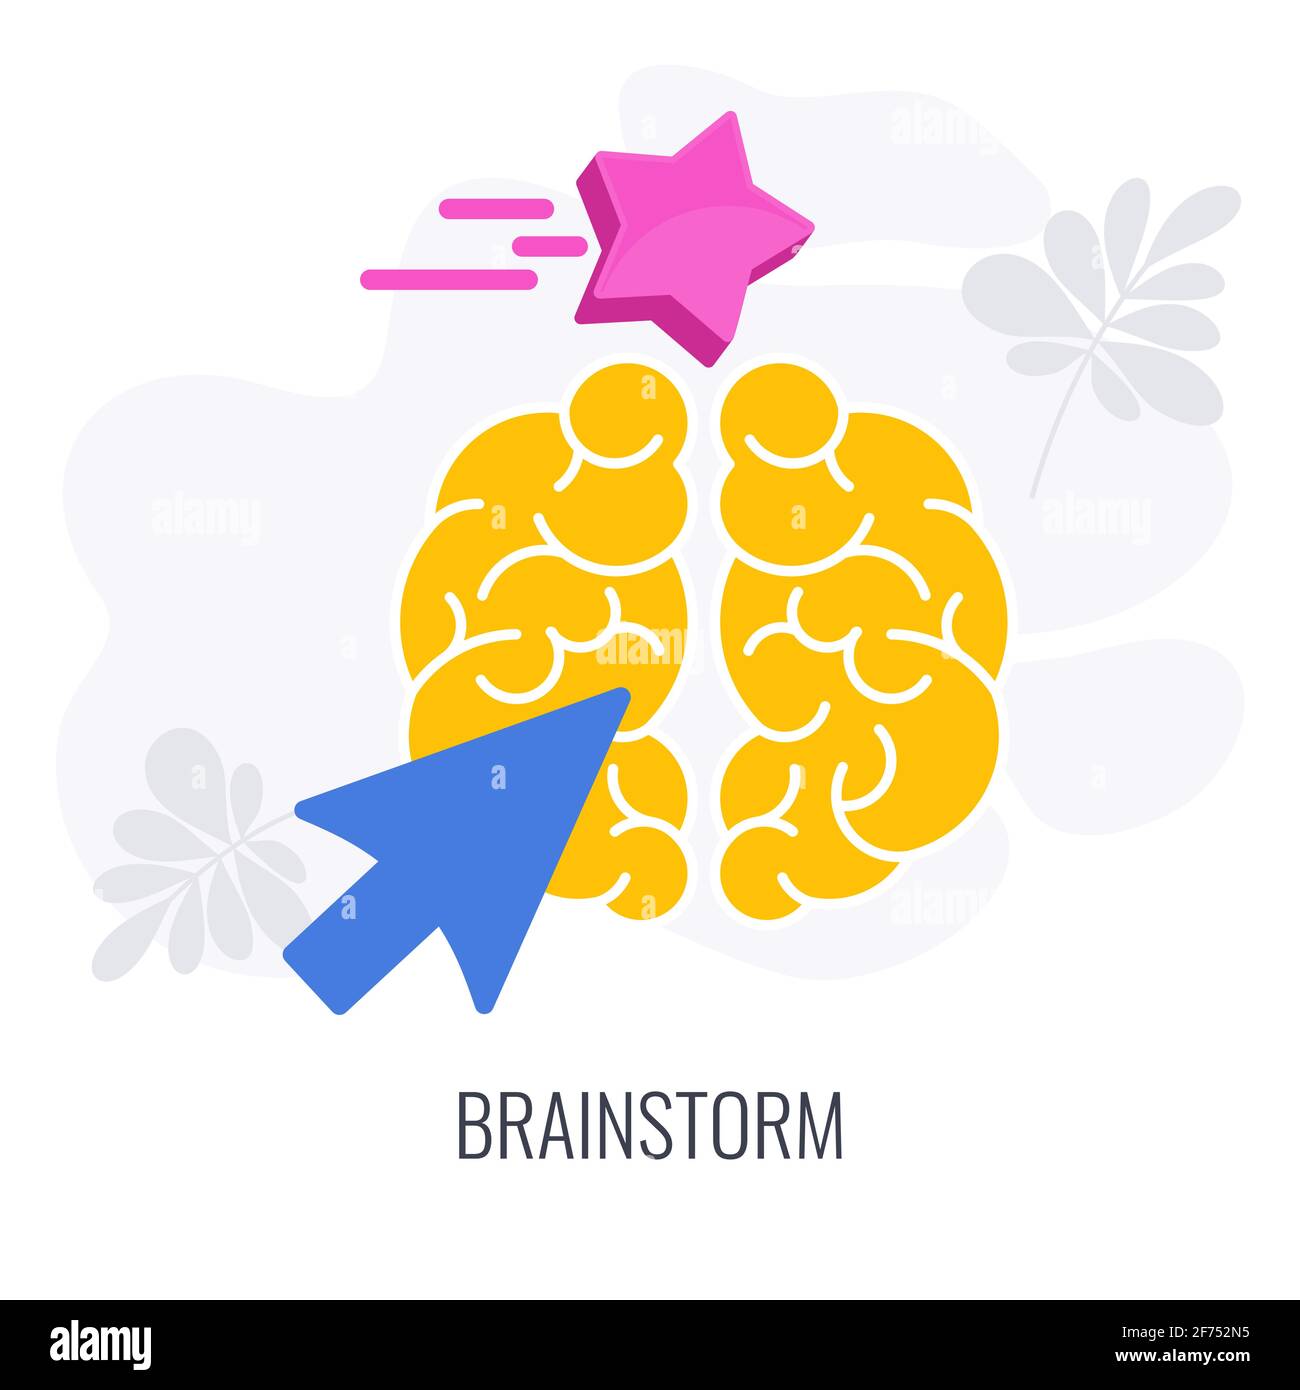 Brainstorm icons. cursor arrow points to a yellow brain icon. Stock Vector